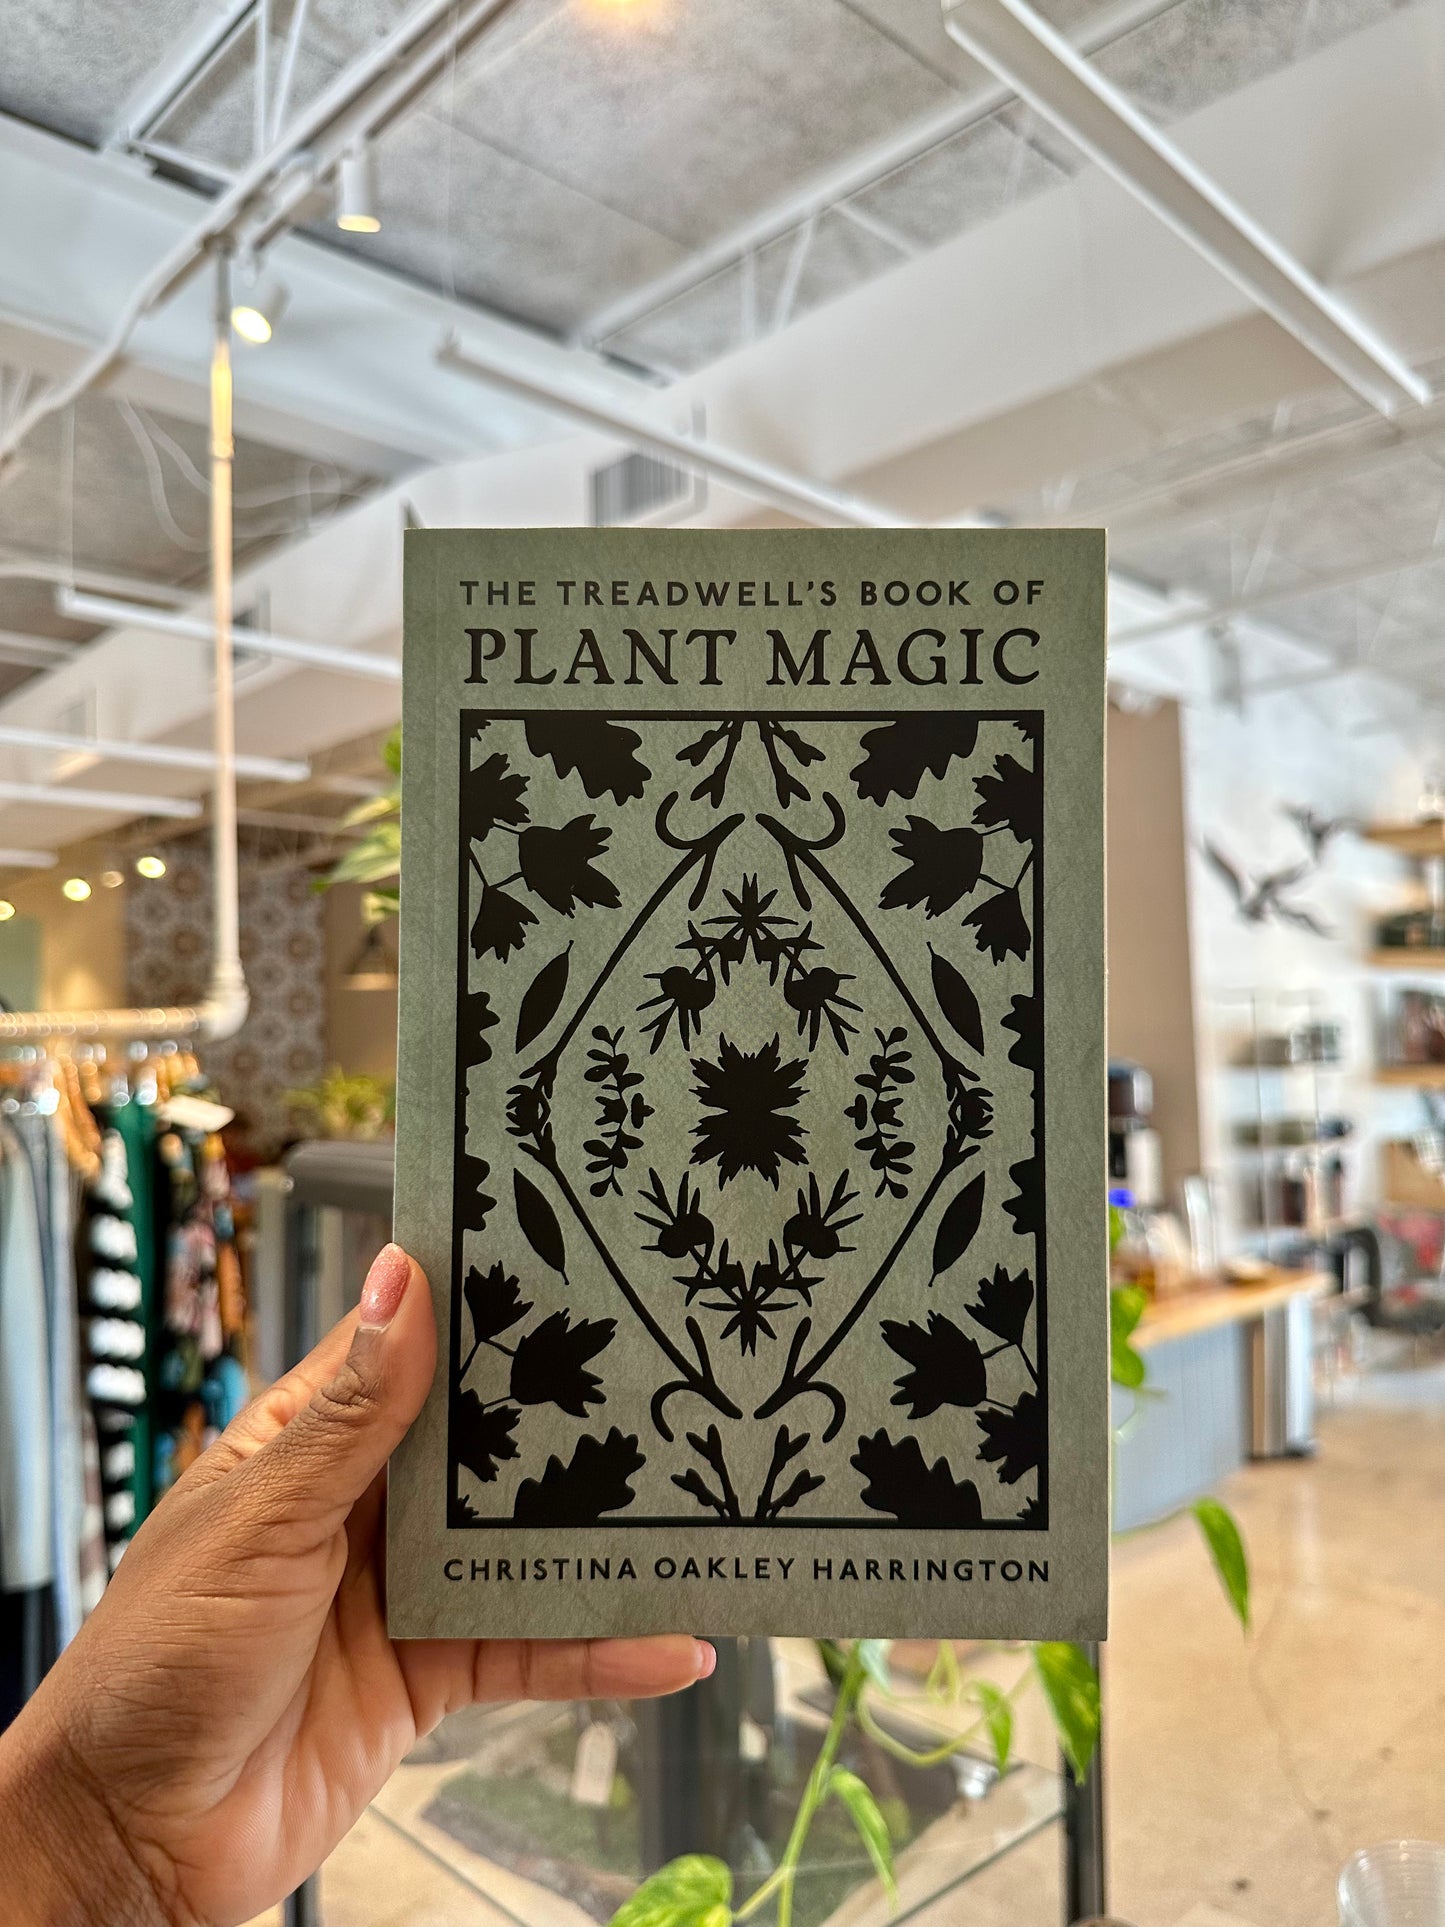 The Treadwell’s Book of Plant Magic